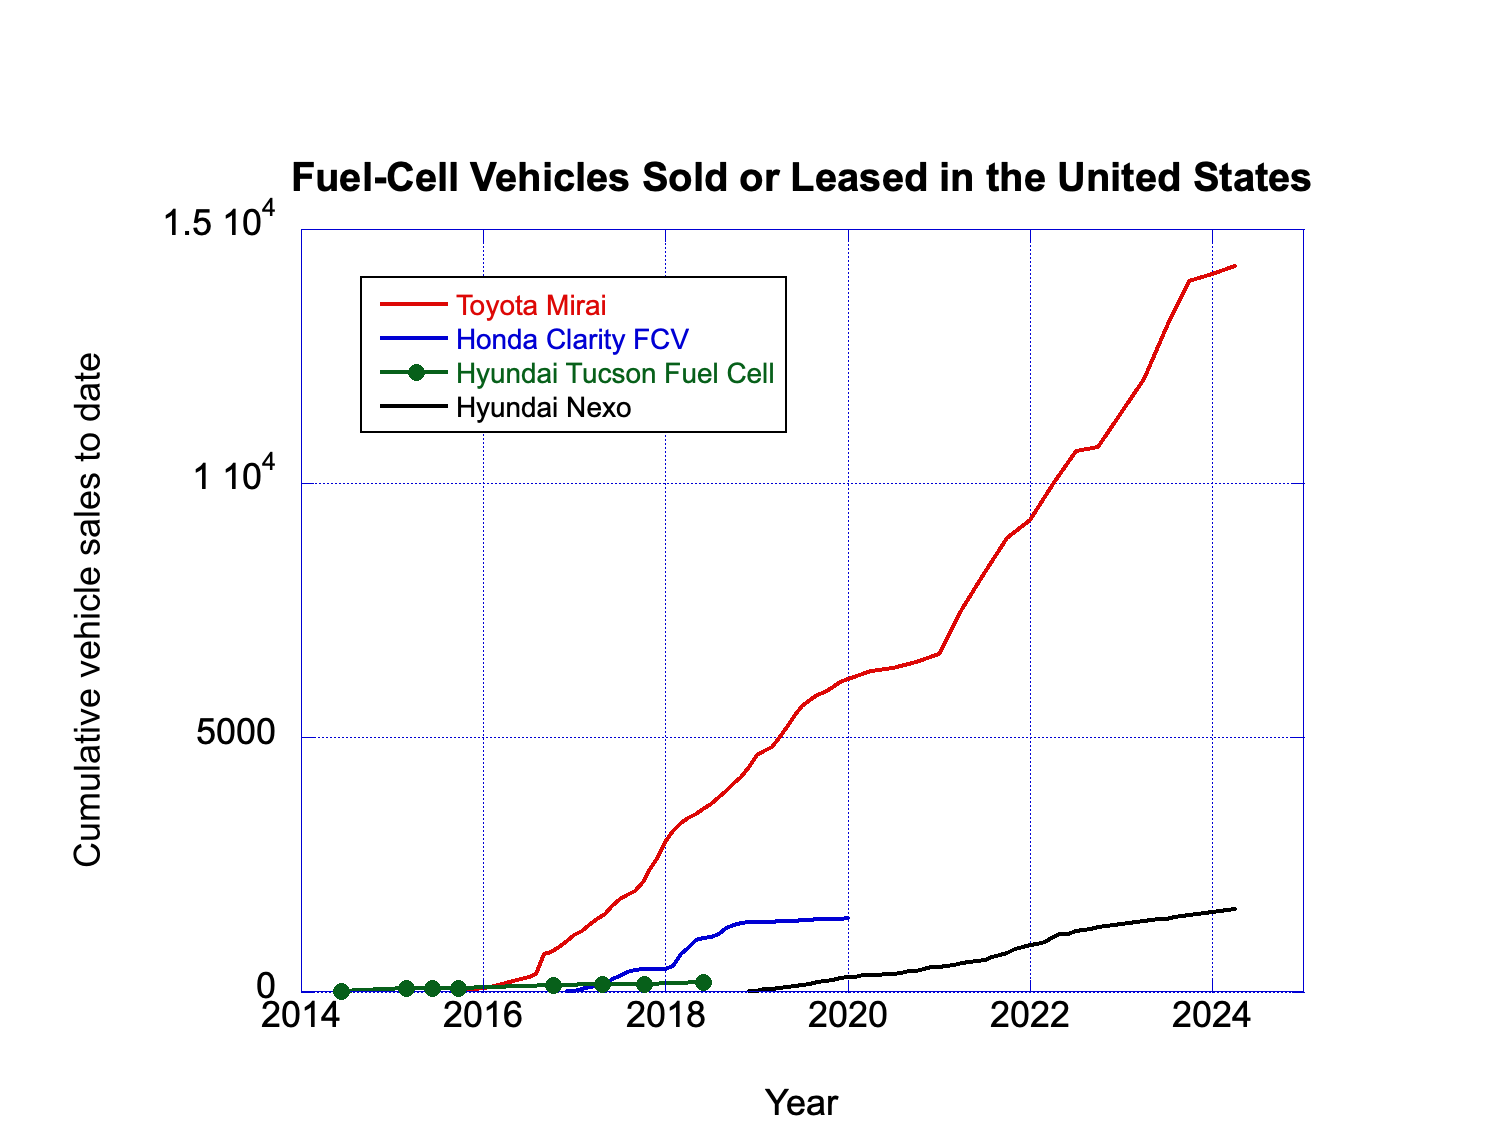 Fuel-cell vehicles